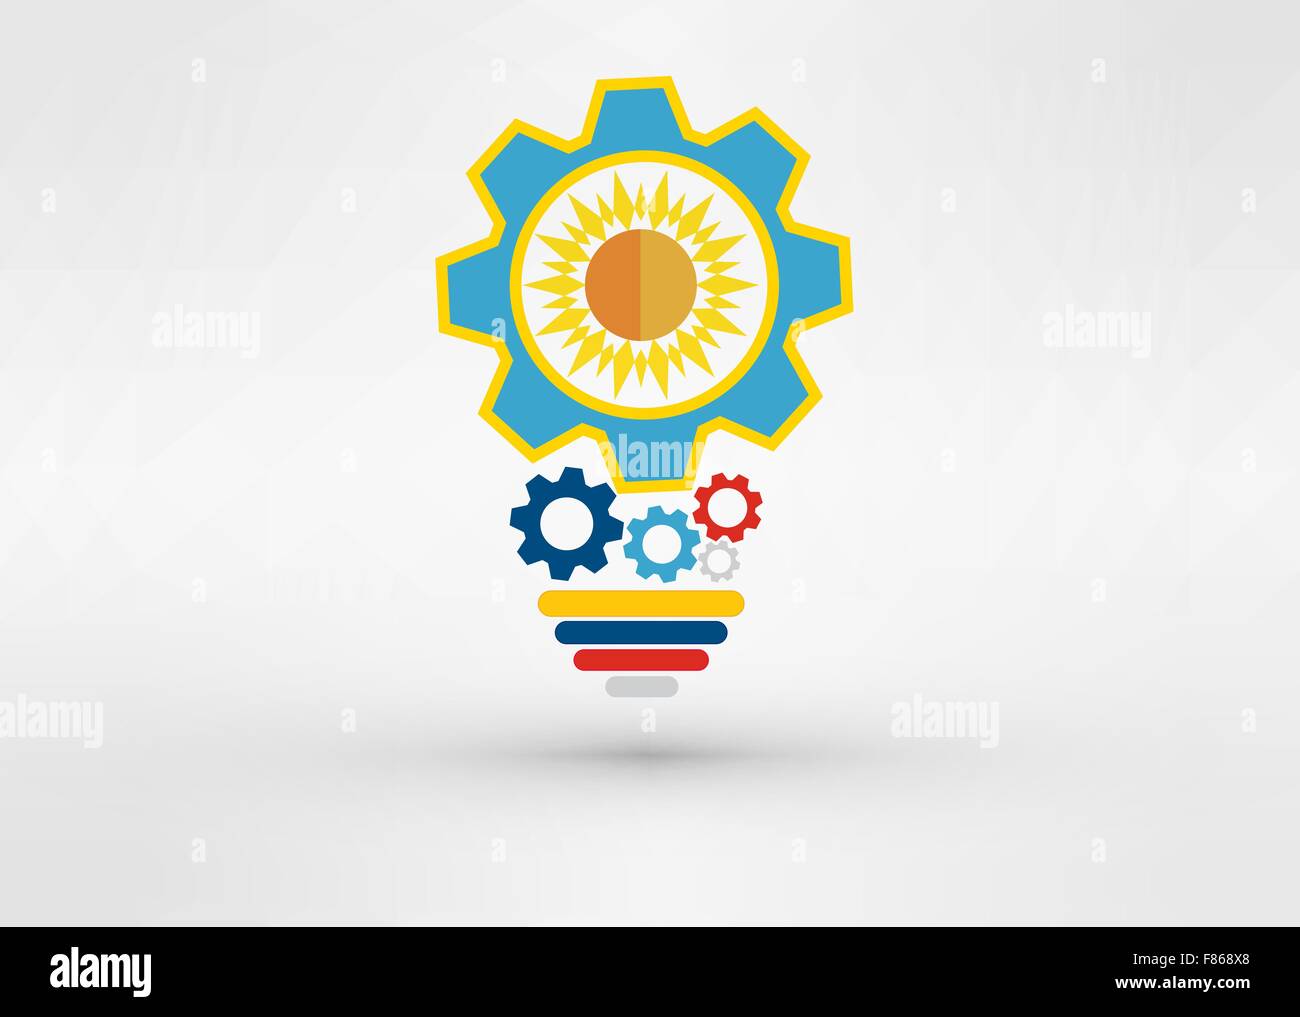 https://c8.alamy.com/comp/F868X8/light-bulb-vector-icon-low-poly-style-idea-icon-origami-style-on-white-F868X8.jpg